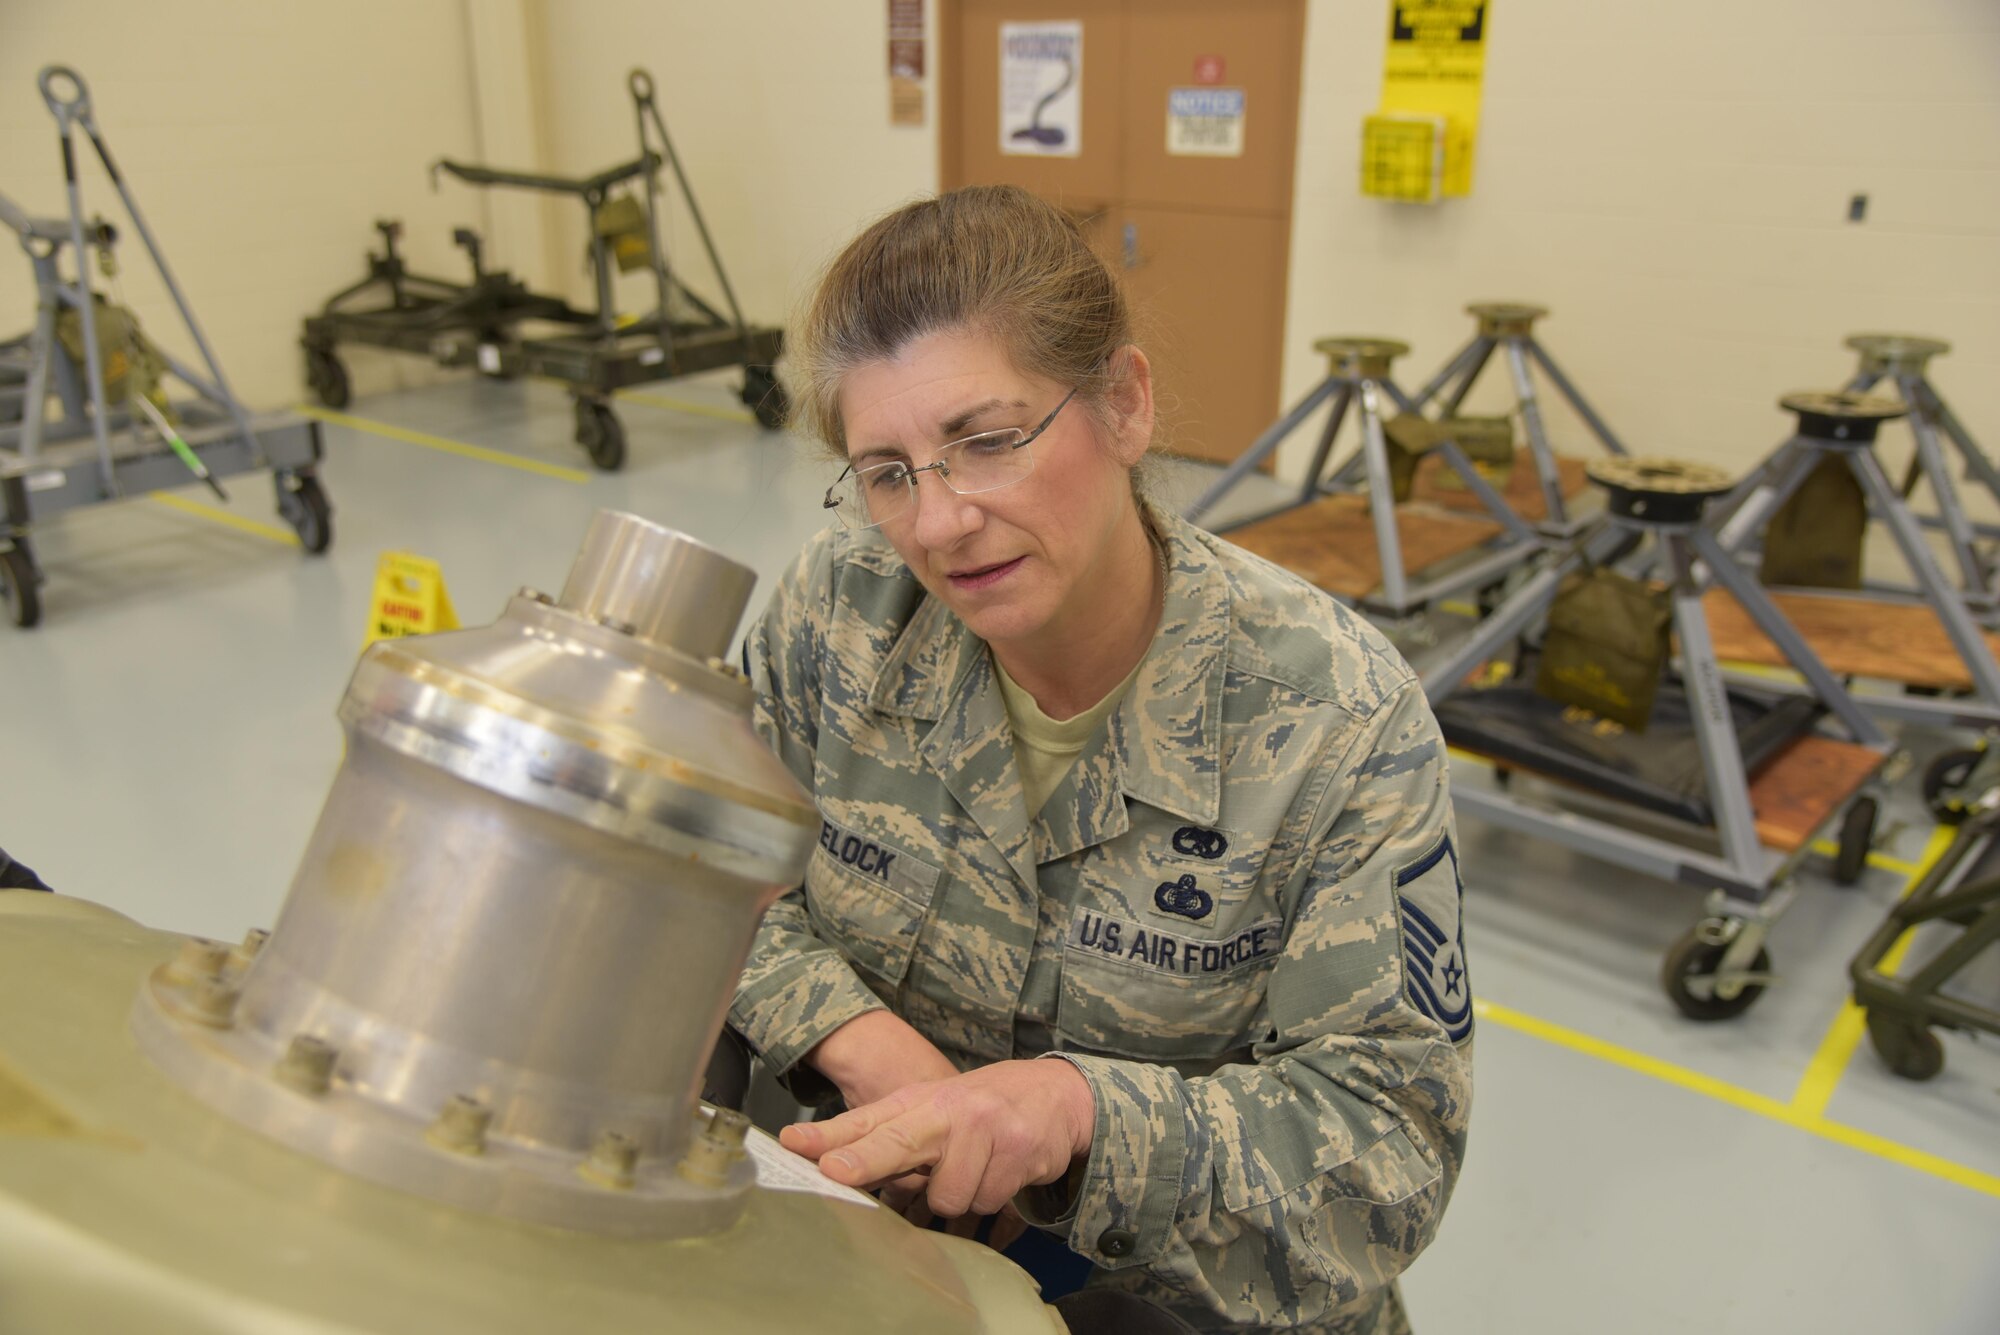 Master Sgt. Katherine Wheelock, 403rd Maintenance Group engine manager, conducts an inventory verifying the serial number on a C-130J Super Hercules aircraft propeller Feb. 5, 2016, at Keesler Air Force Base, Mississippi. Wheelock joined the Air Force in 1979, got out in 1986, and joined the Air Force Reserve's 403rd Wing in 1996 and became an Air Reserve Technician in 1998. (U.S. Air Force photo/Maj. Marnee A.C. Losurdo)